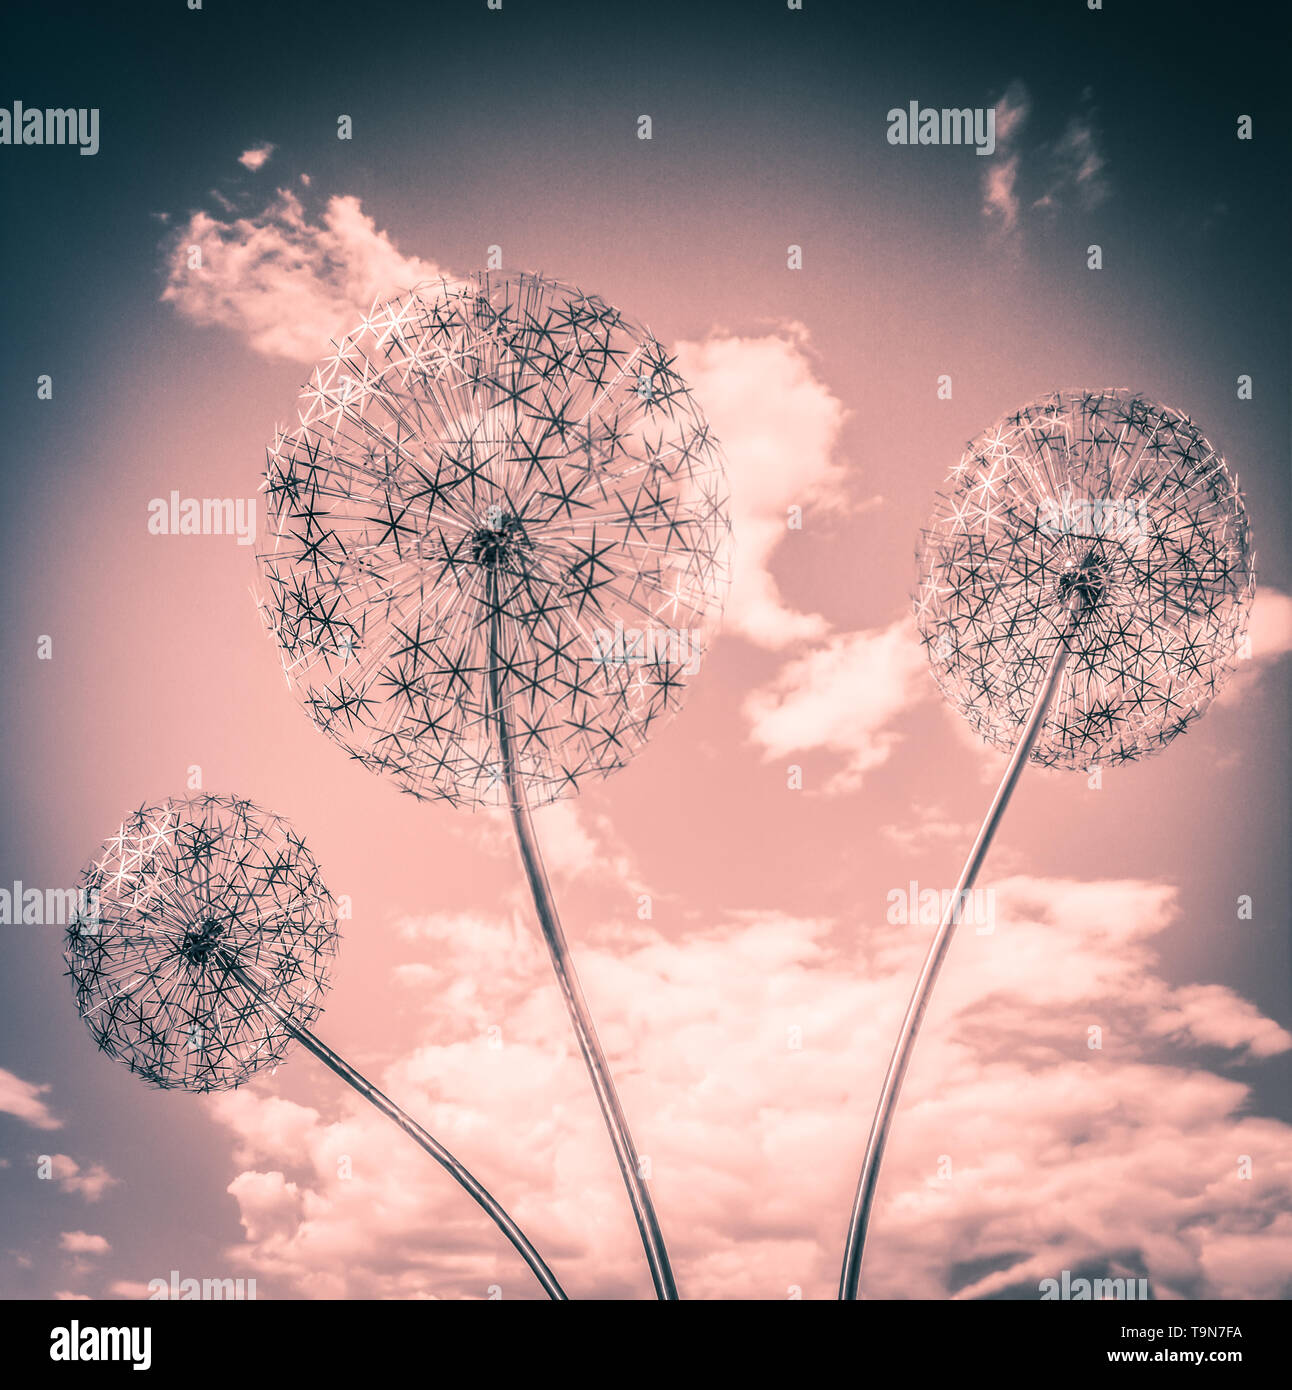 A skyward view of three Amazing Stainless steel Dandelions isolated and rising up to the clouds for an imaginative conceptual sensibility in Rose tone Stock Photo